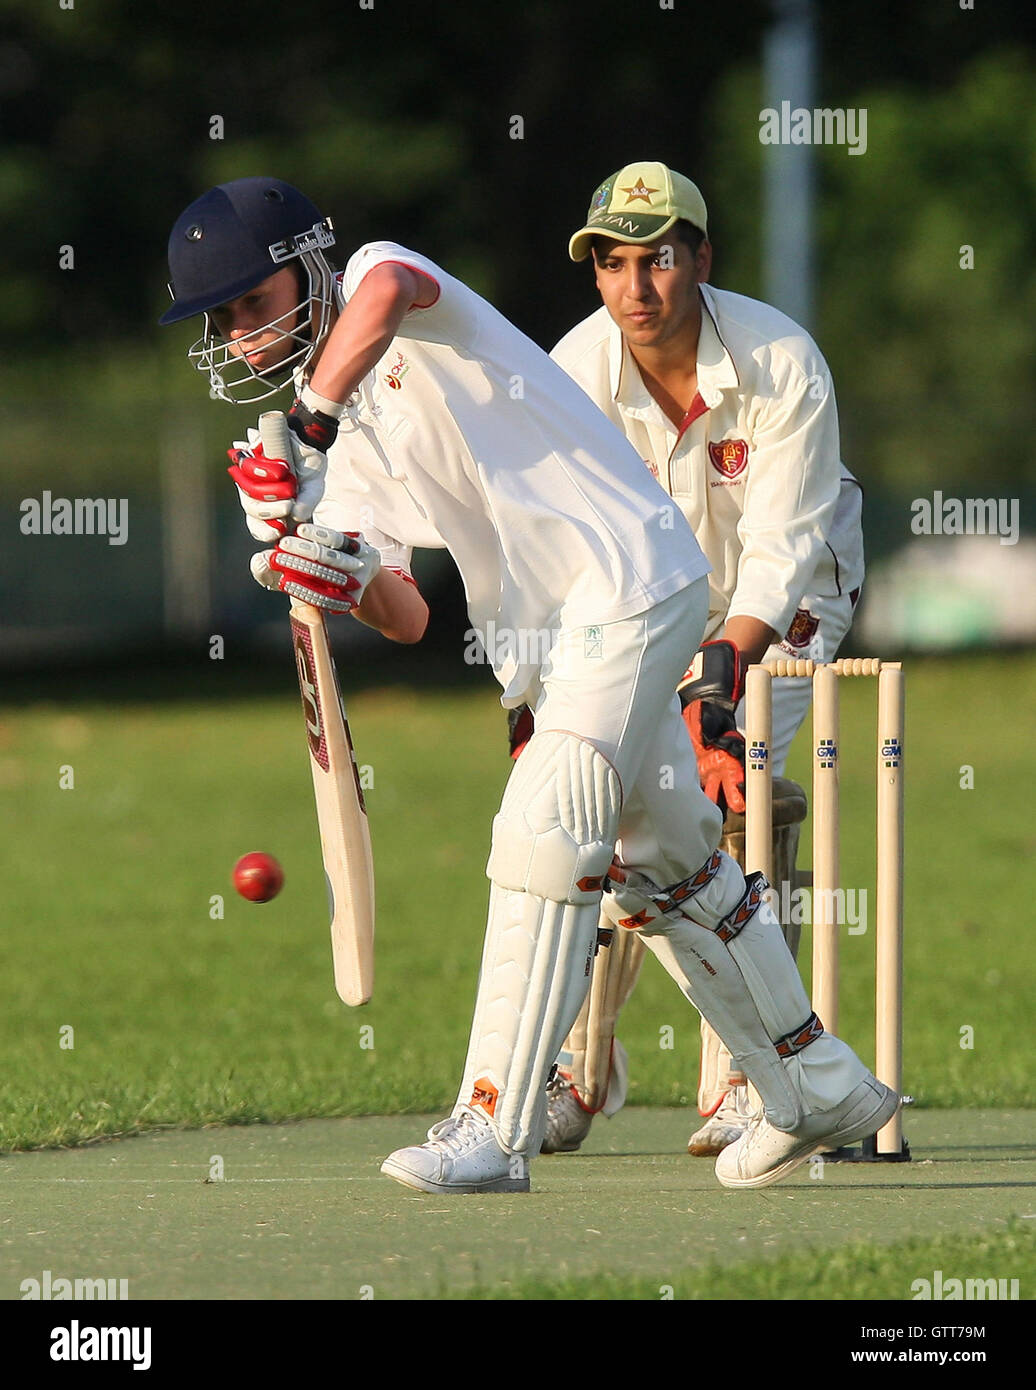 Scott in batting action for VPJ as Raja looks on from behind the stumps - Victoria Park Juniors vs Goodmayes - Victoria Park Community Cricket League - 09/06/08 Stock Photo